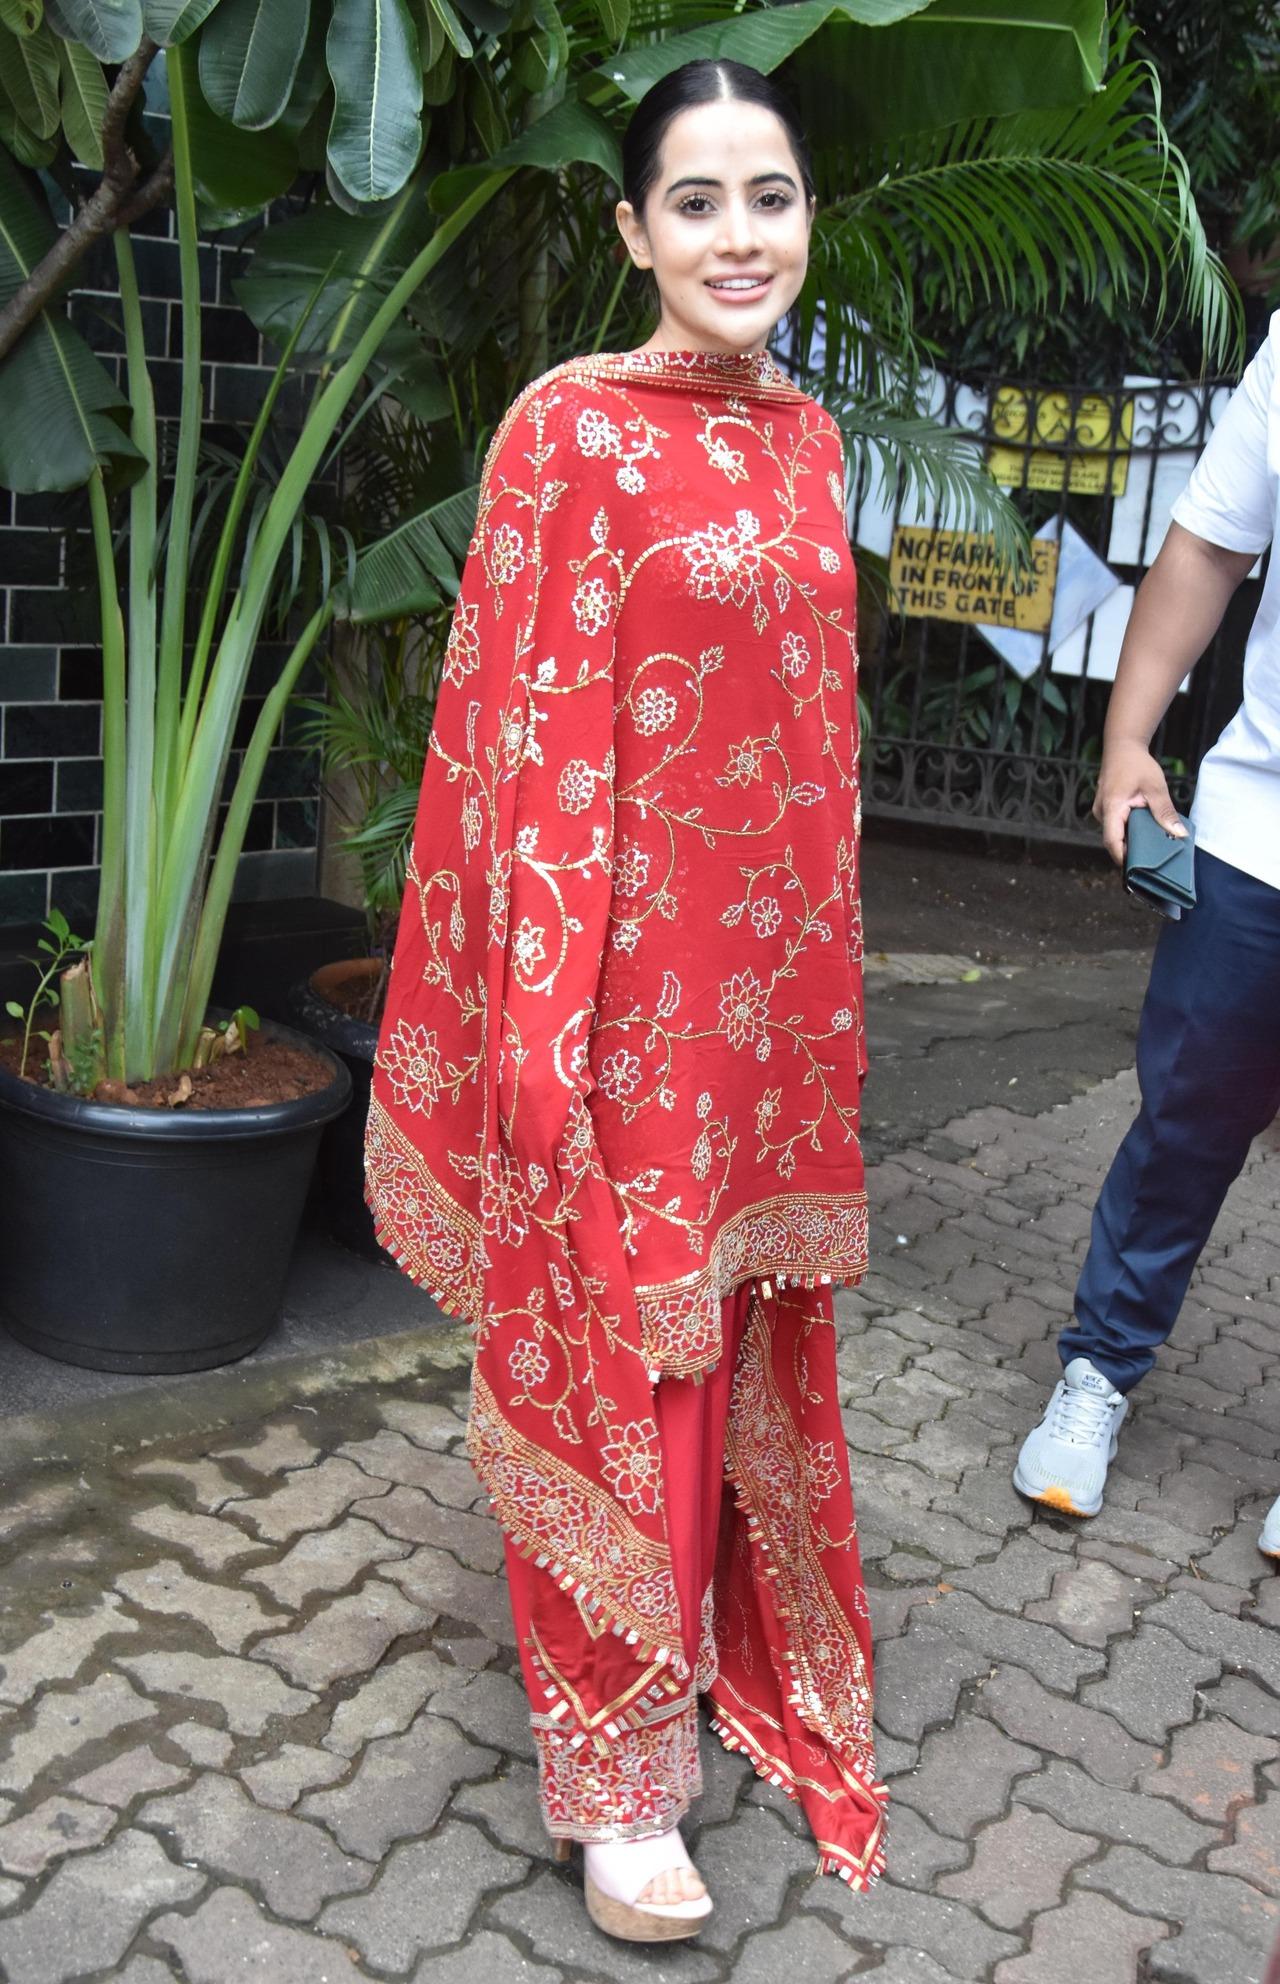 Uorfi Javed wore a stunning, heavily embroidered red kurta set as she went out and about in the city